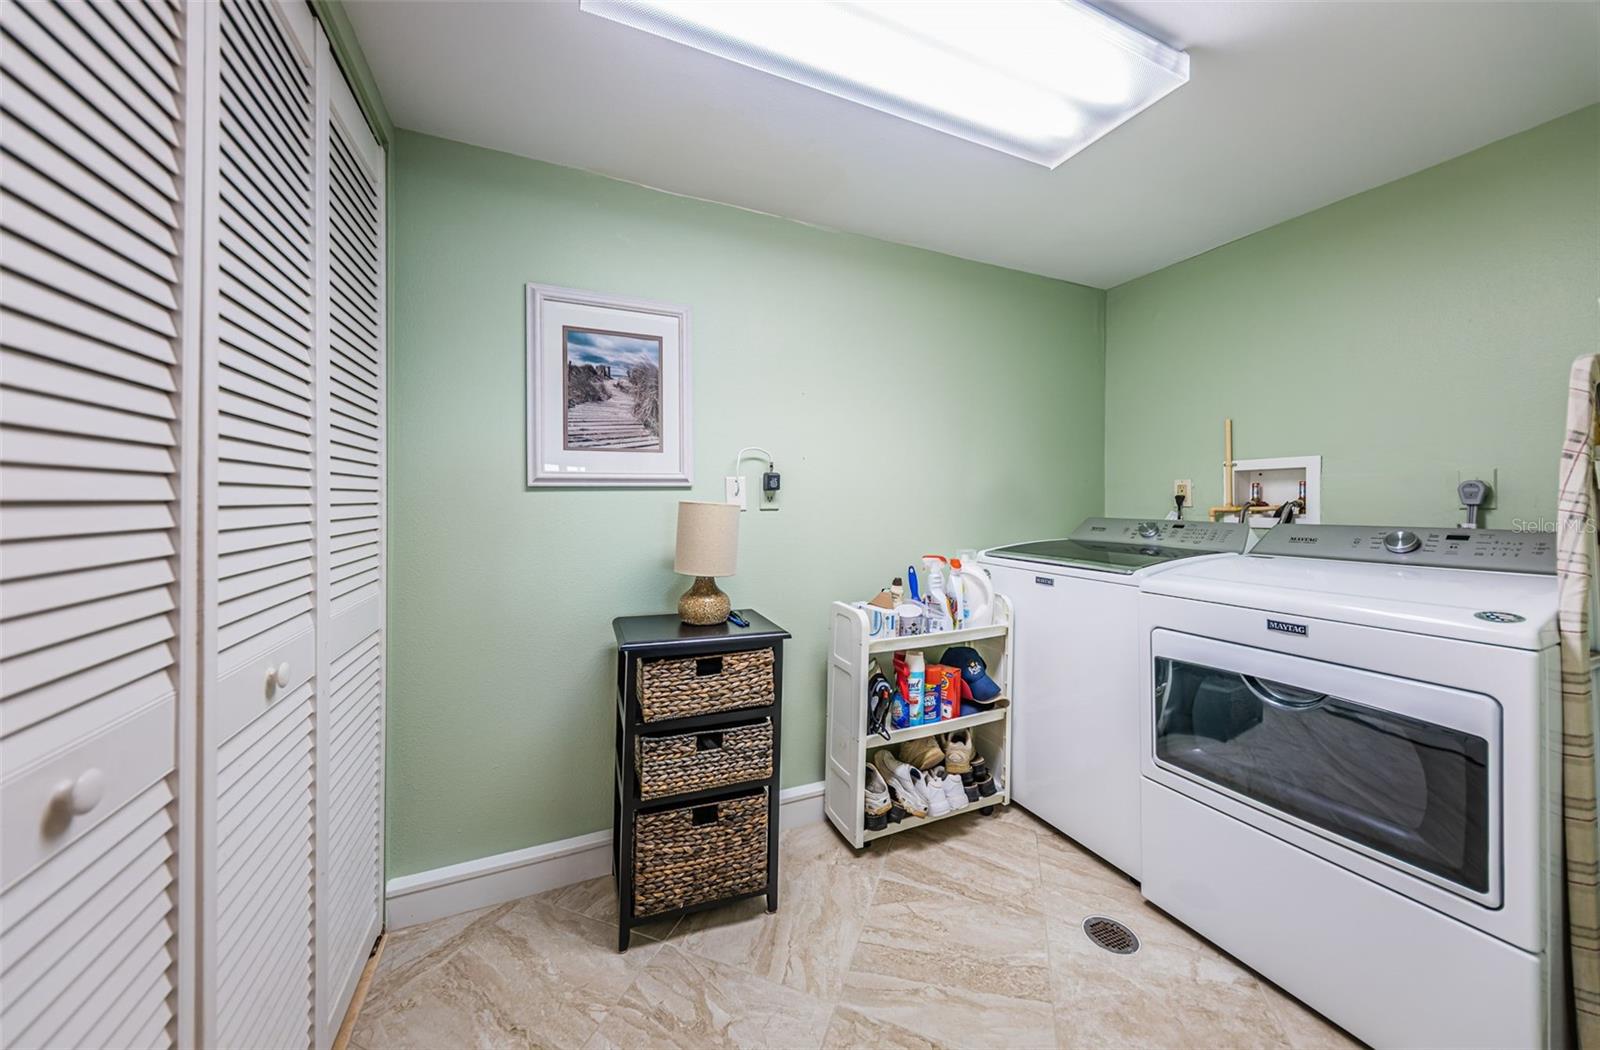 Inside utility room with full sized washer & dryer